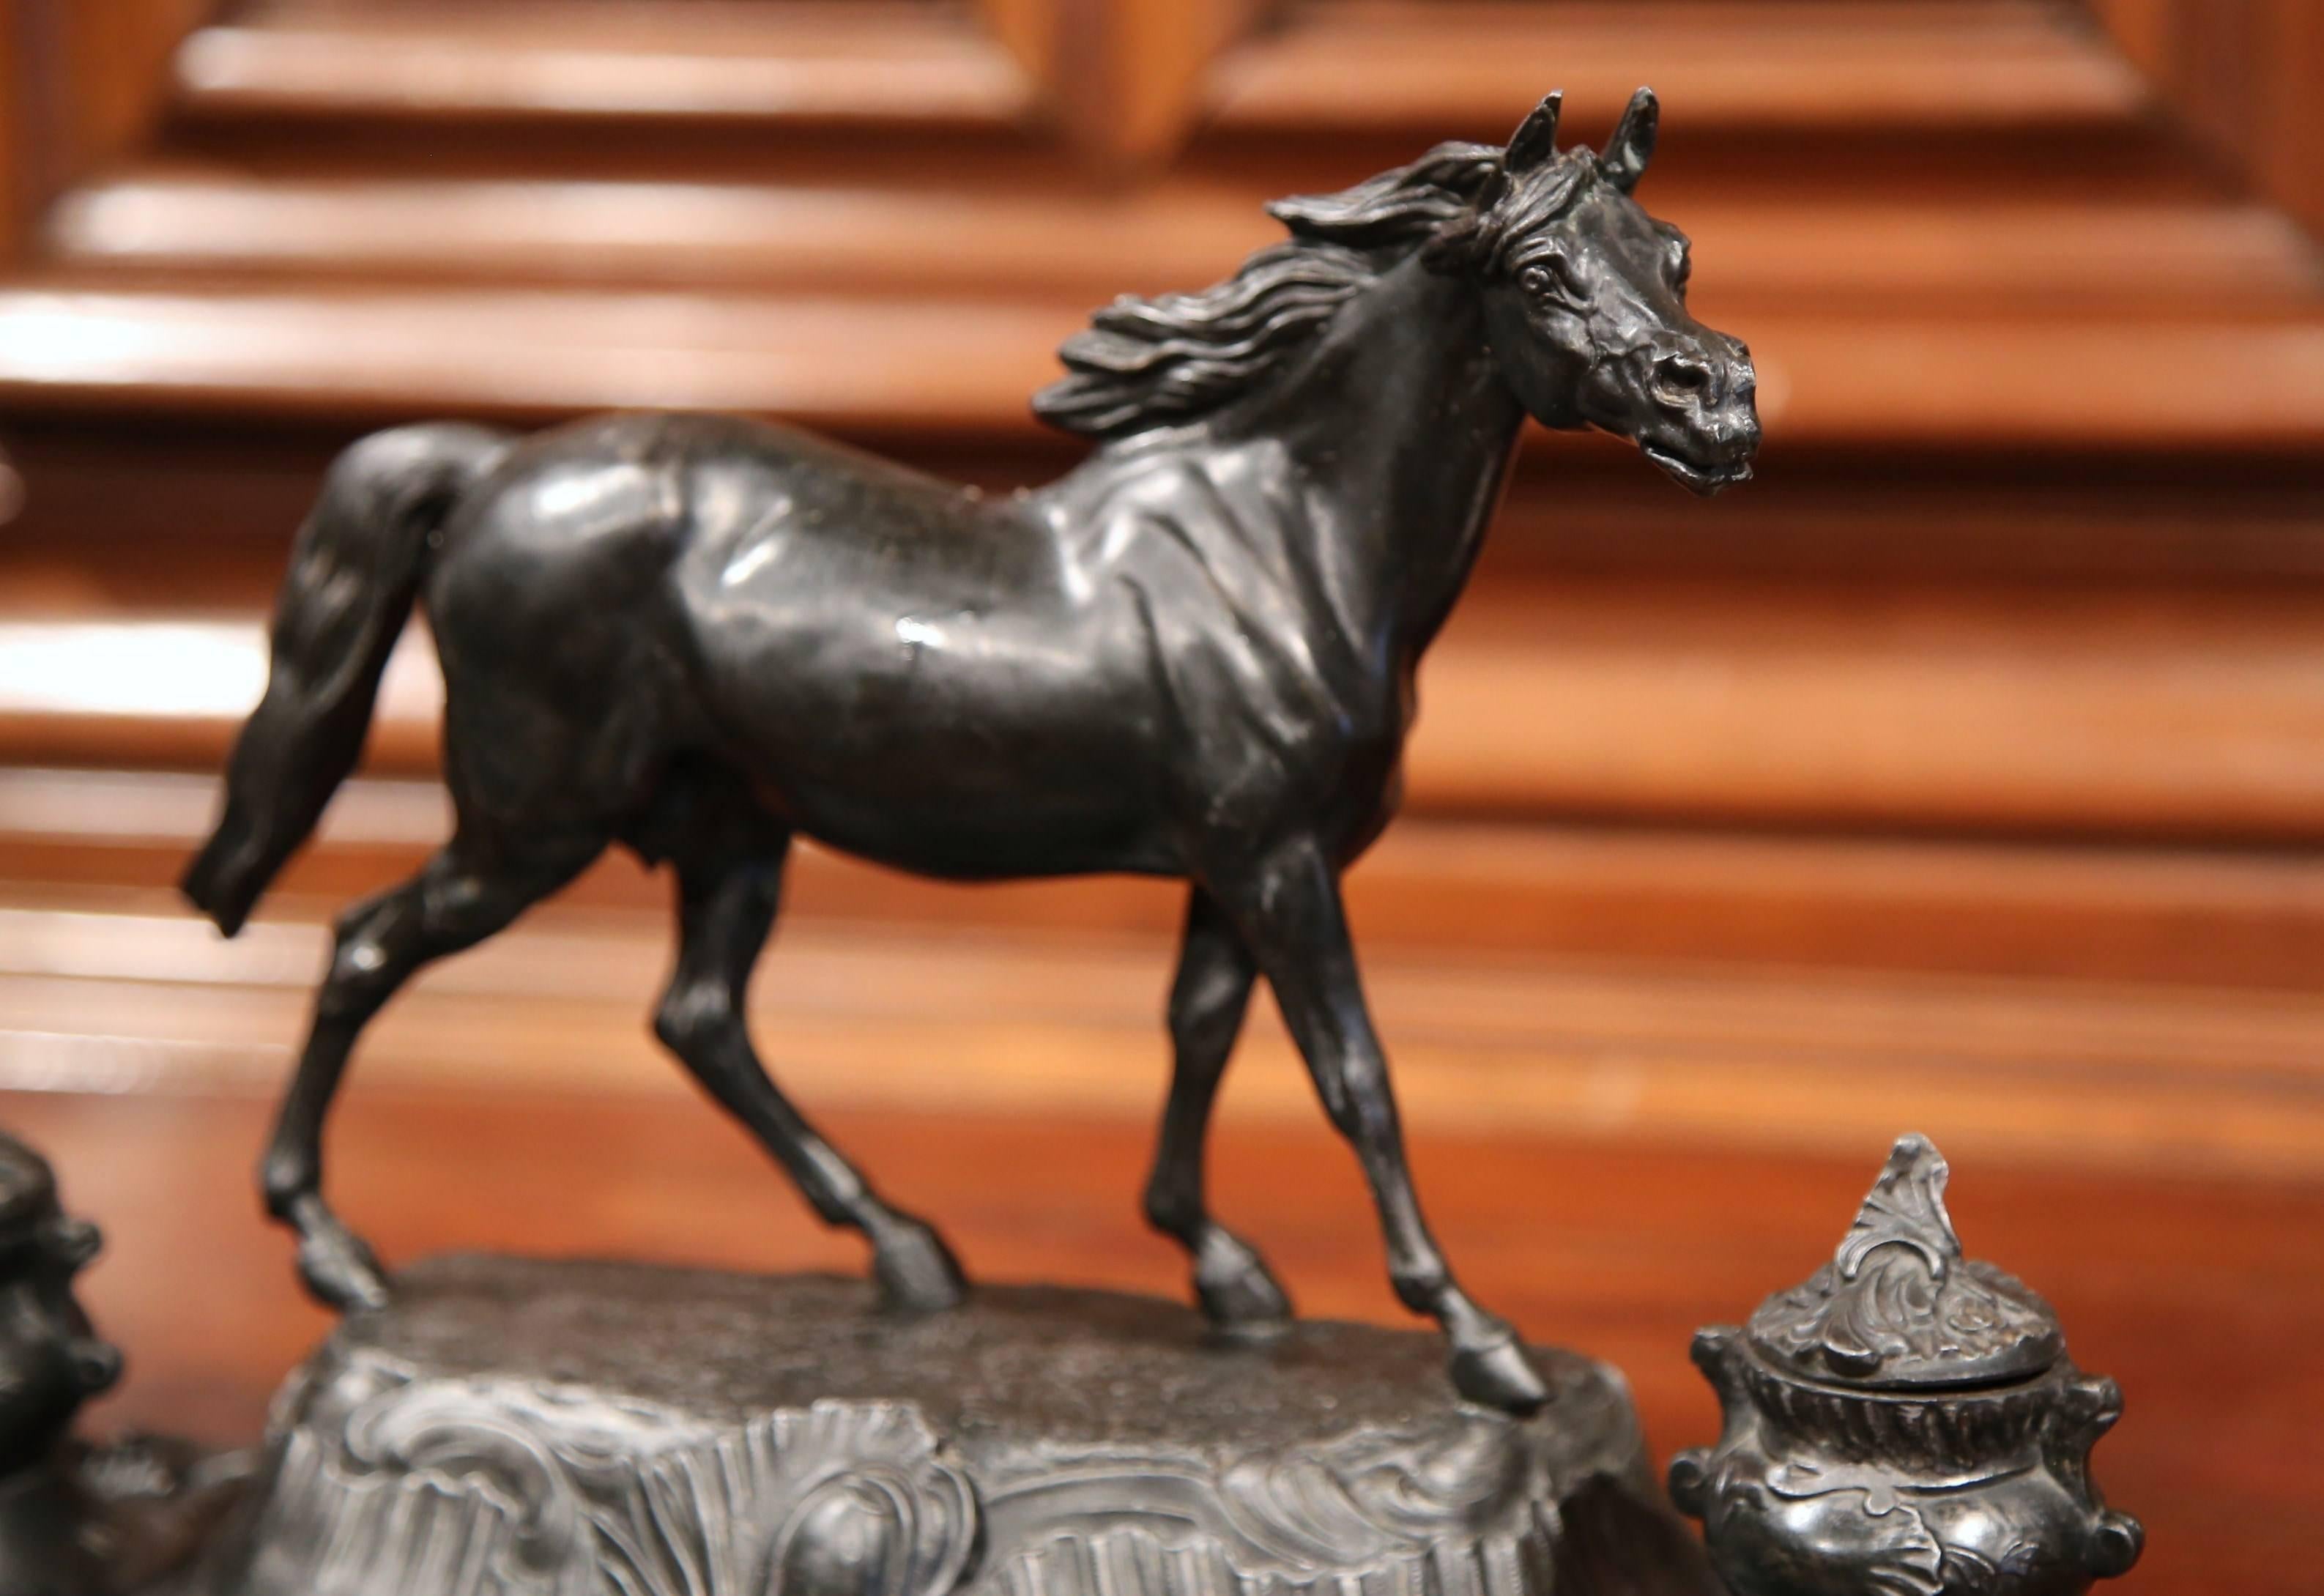 This beautiful, antique horse inkwell was created in France, circa 1880. The desk accessory is made of pot metal and sits on four small curved feet. The office essential features a proud stallion standing on a mount with two ink holders on both